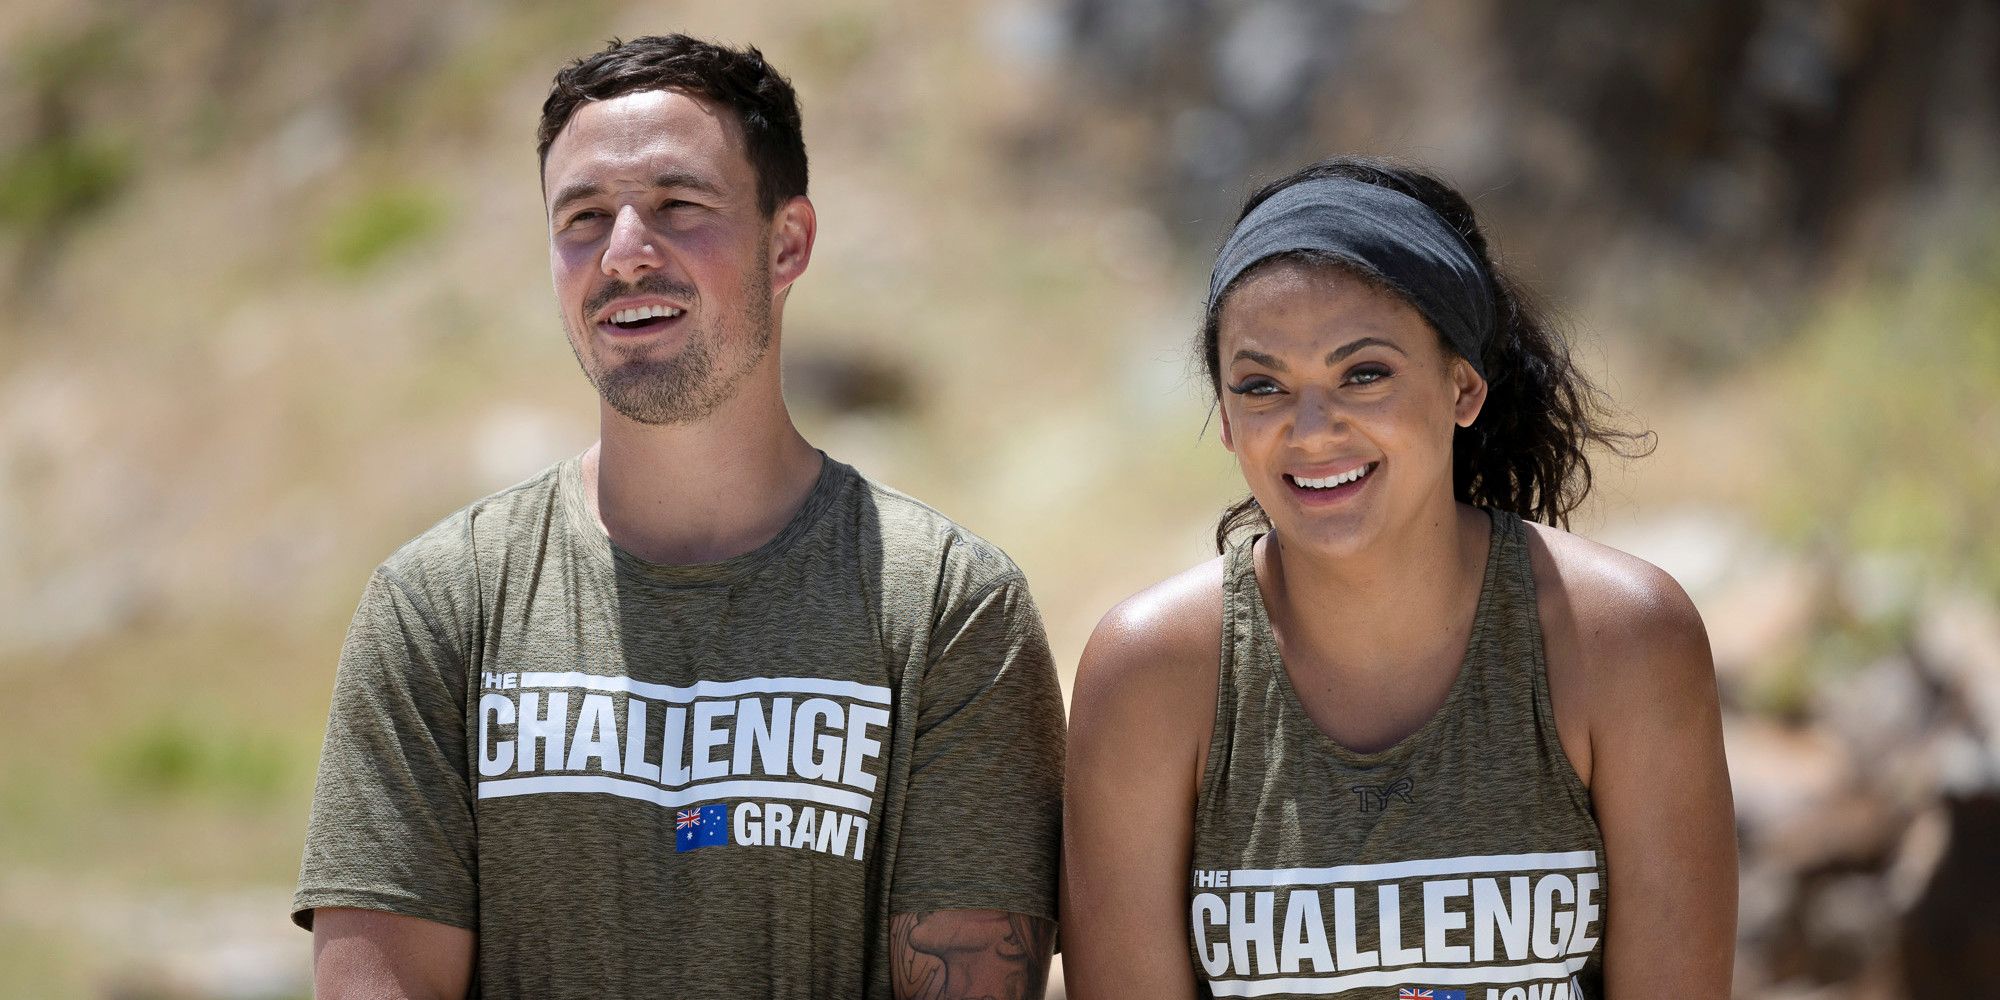 Grant Crapp and Jonna Mannion on The Challenge. They are standing side by side and smiling, wearing matching shirts with The Challenge logo and the Australian flag on them.